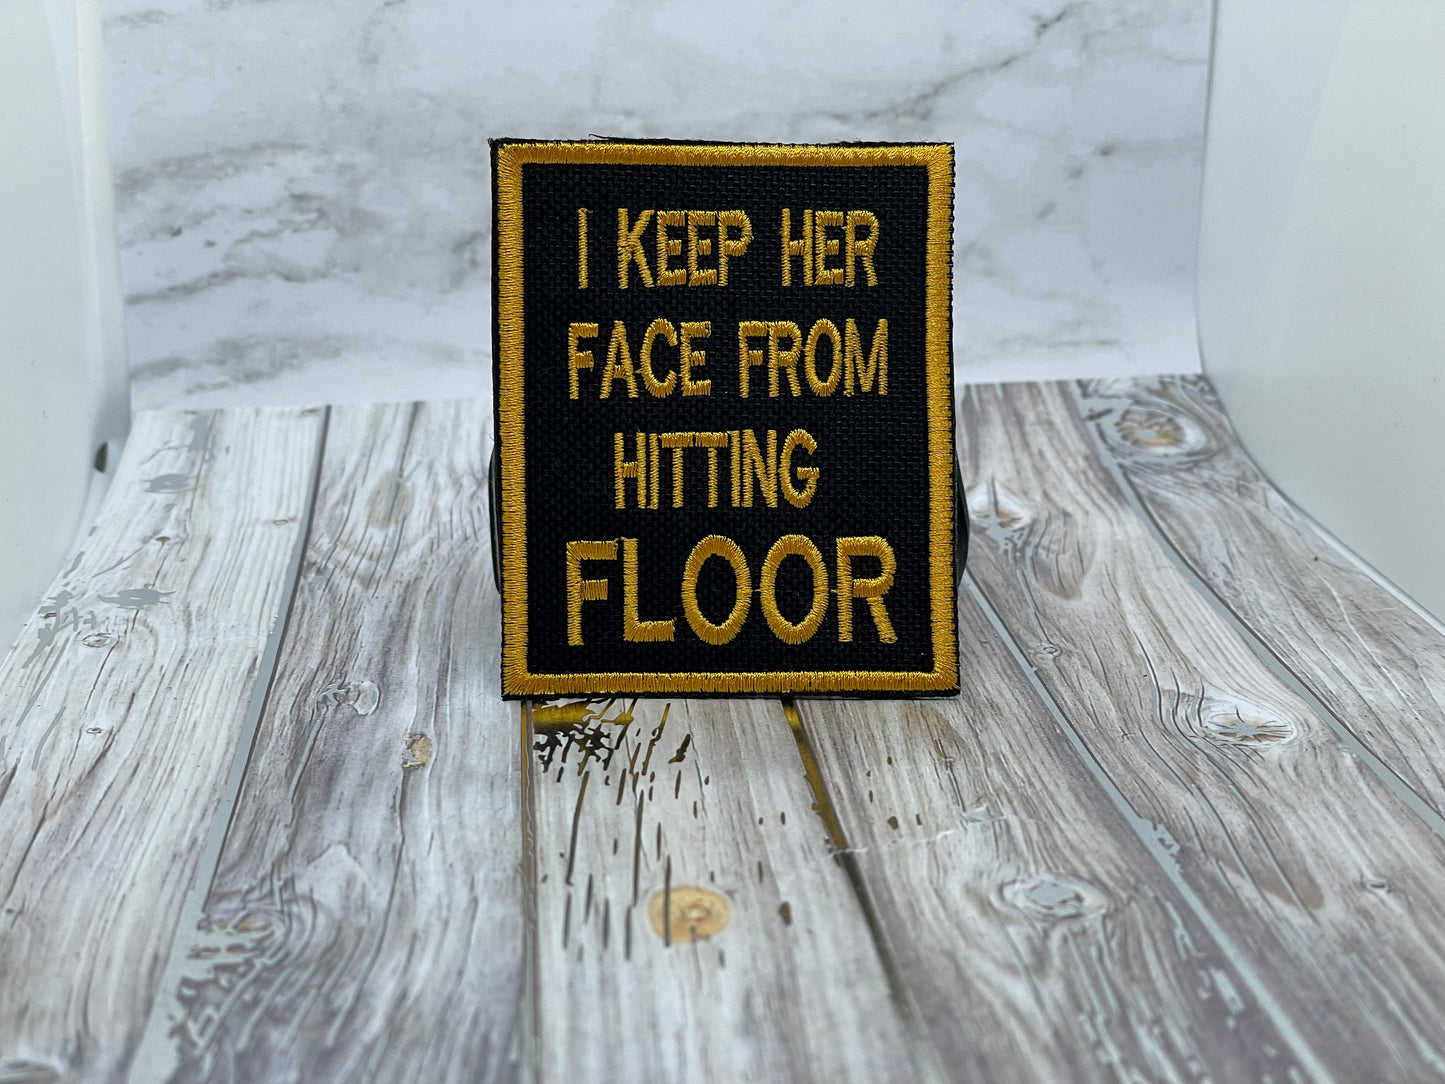 Pre Designed Patch "I KEEP HER FACE FROM HITTING THE FLOOR"